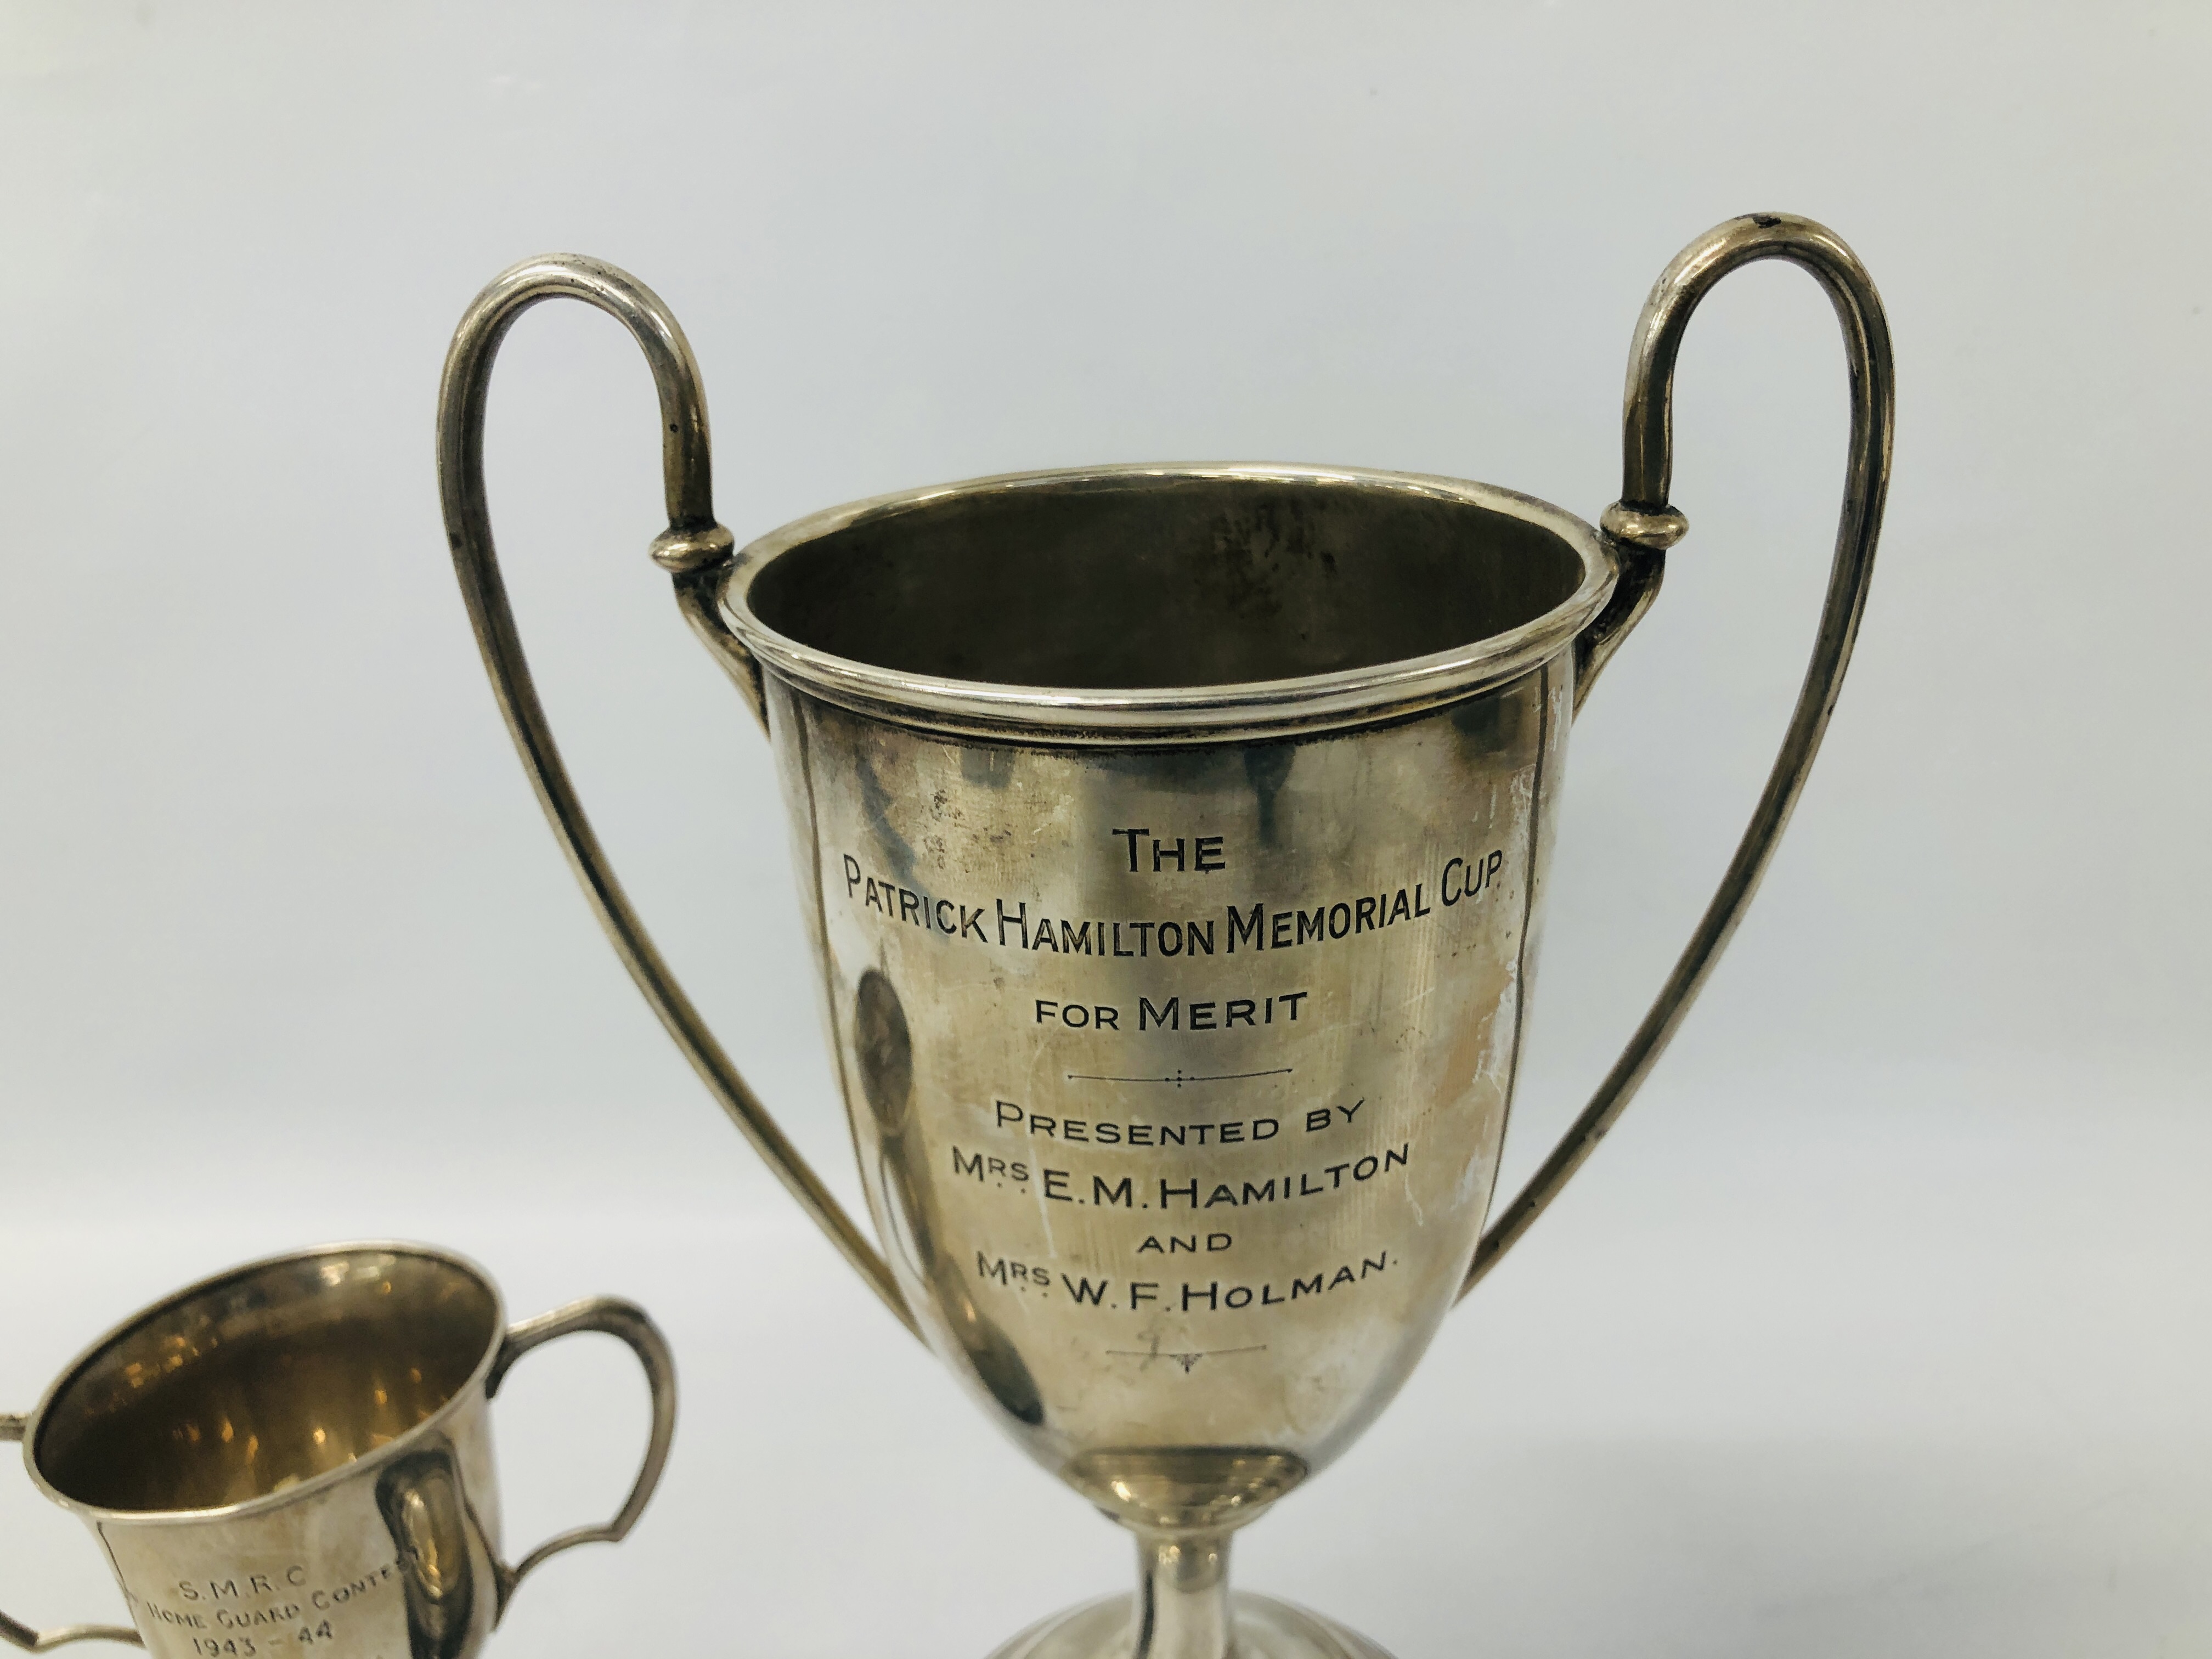 AN ANTIQUE TWO HANDLED SILVER PRESENTATION CUP BEARING INSCRIPTION RELATING TO THE PLATOON - Image 2 of 14